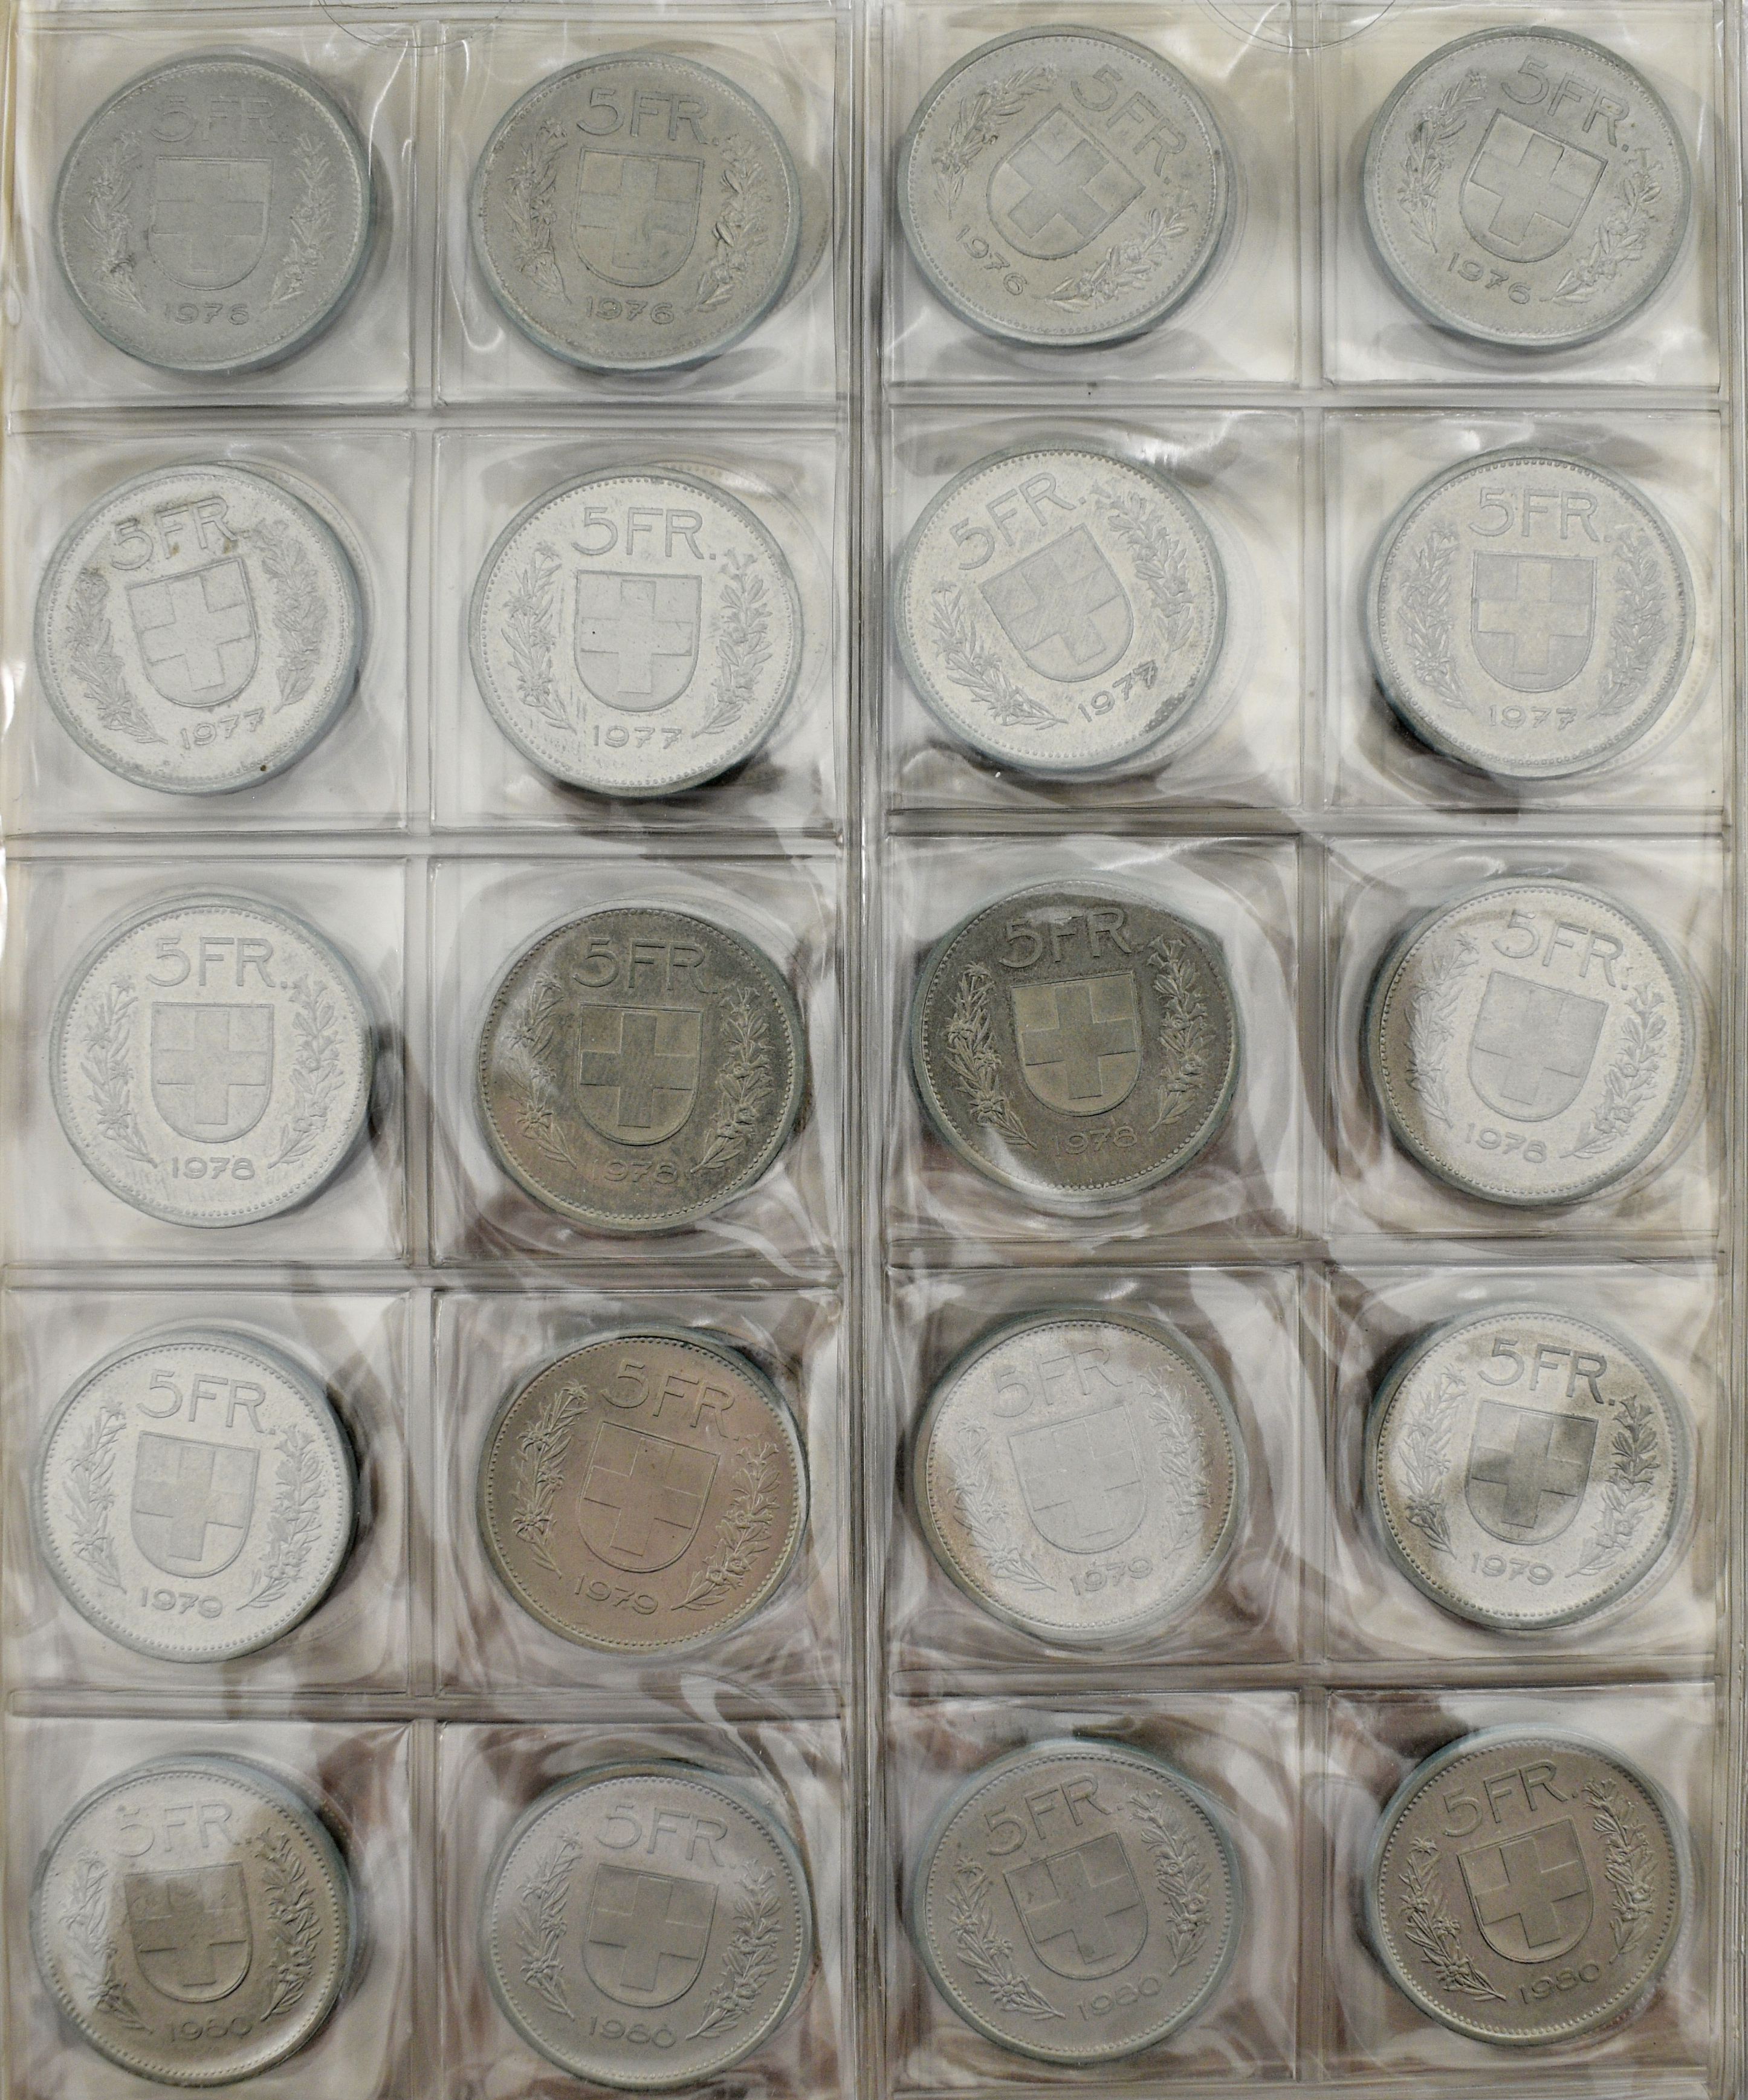 Lot 01274 - Schweiz | Europa  -  Auktionshaus Christoph Gärtner GmbH & Co. KG 54th AUCTION - Day 1 Coins & Banknotes